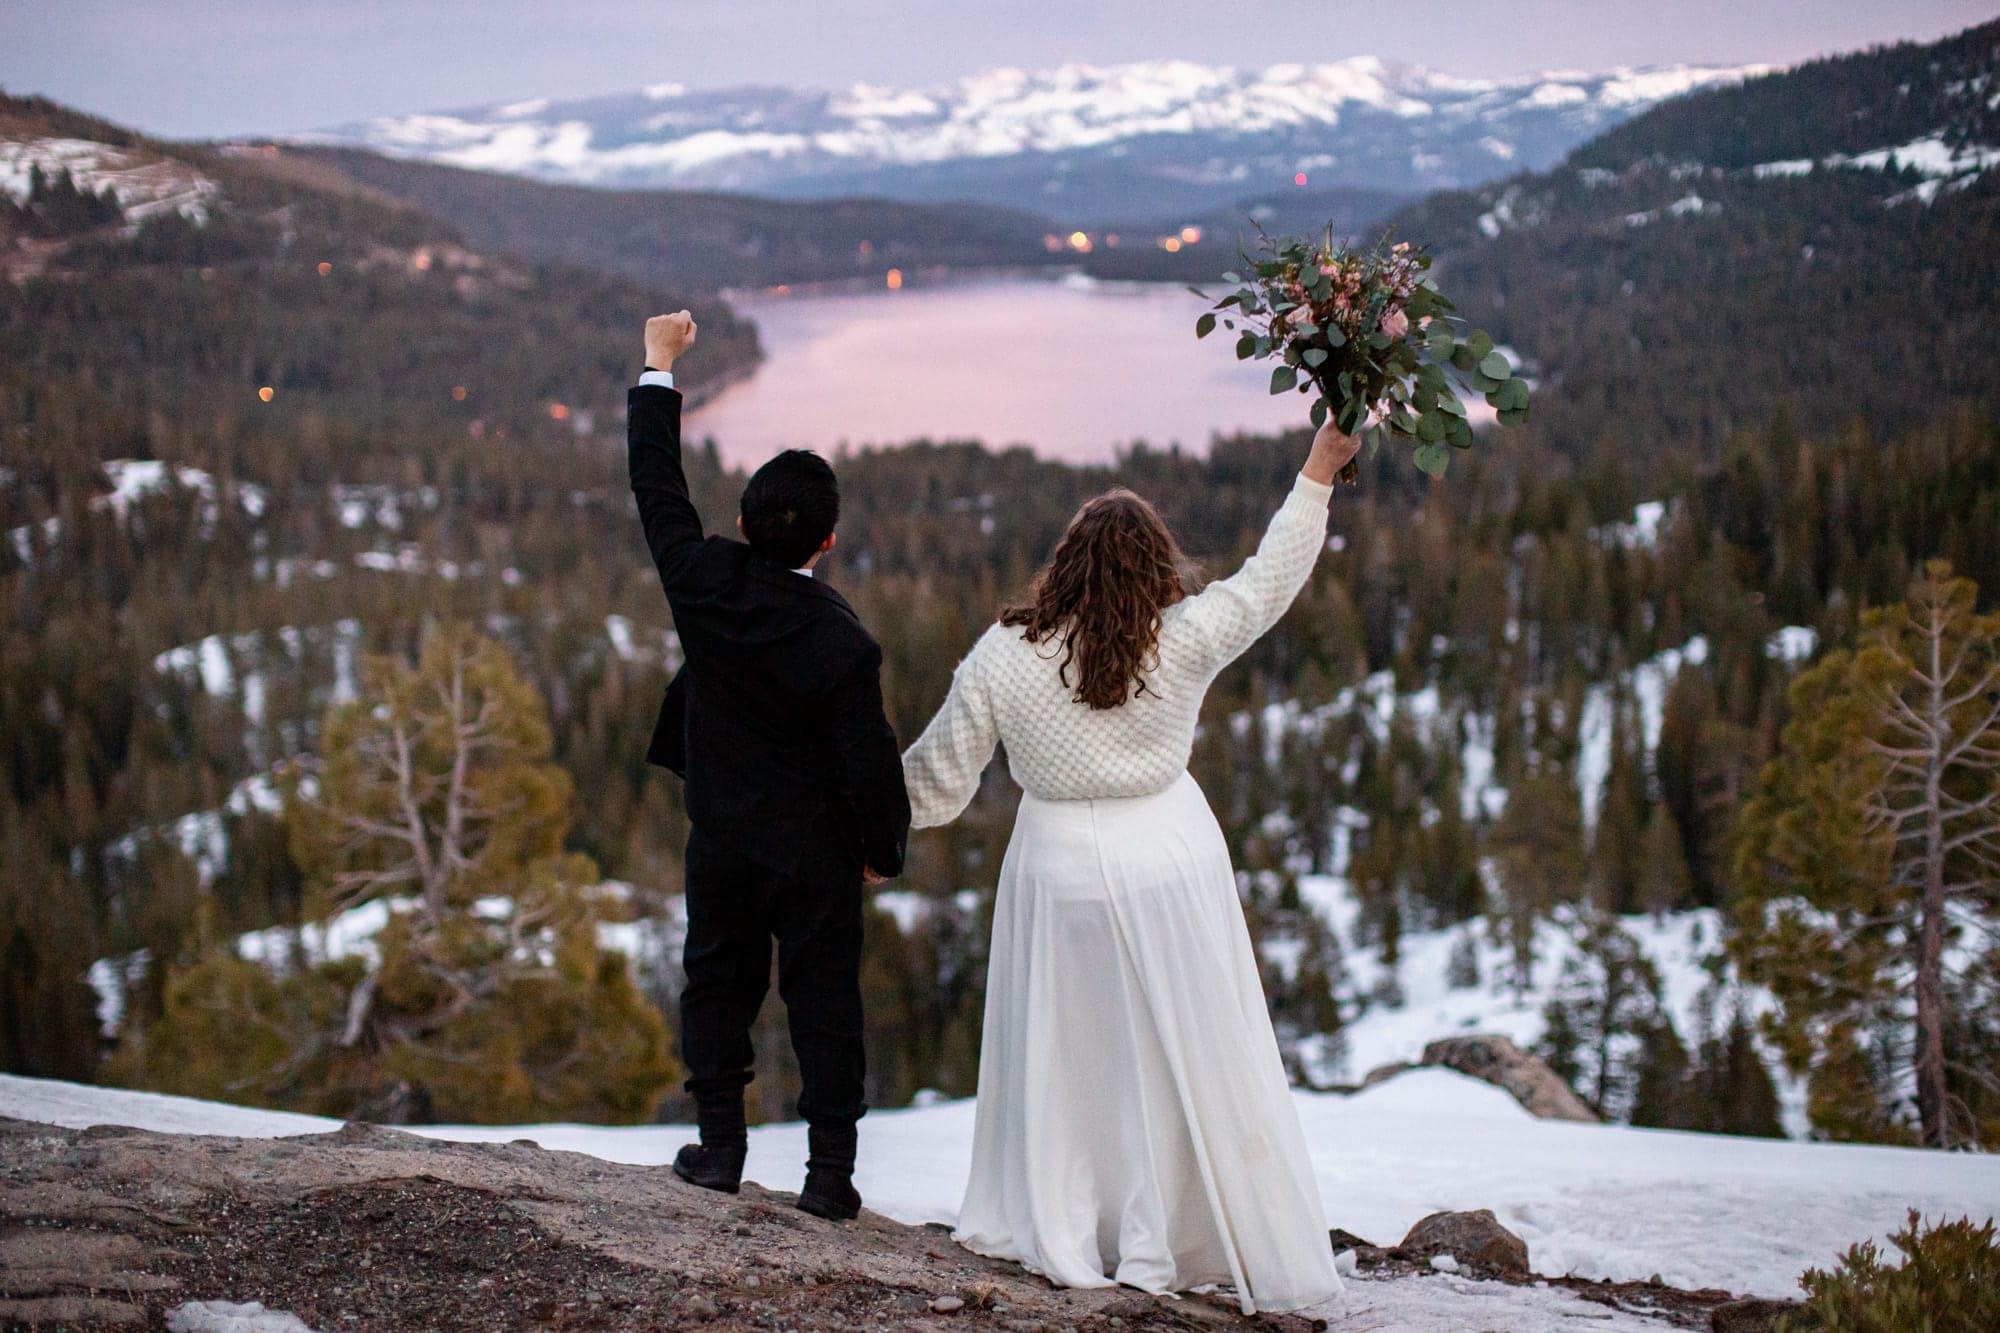 husband and wife standing in the mountains overlooking a lake down below at sunset celebrating with their hands in the air.